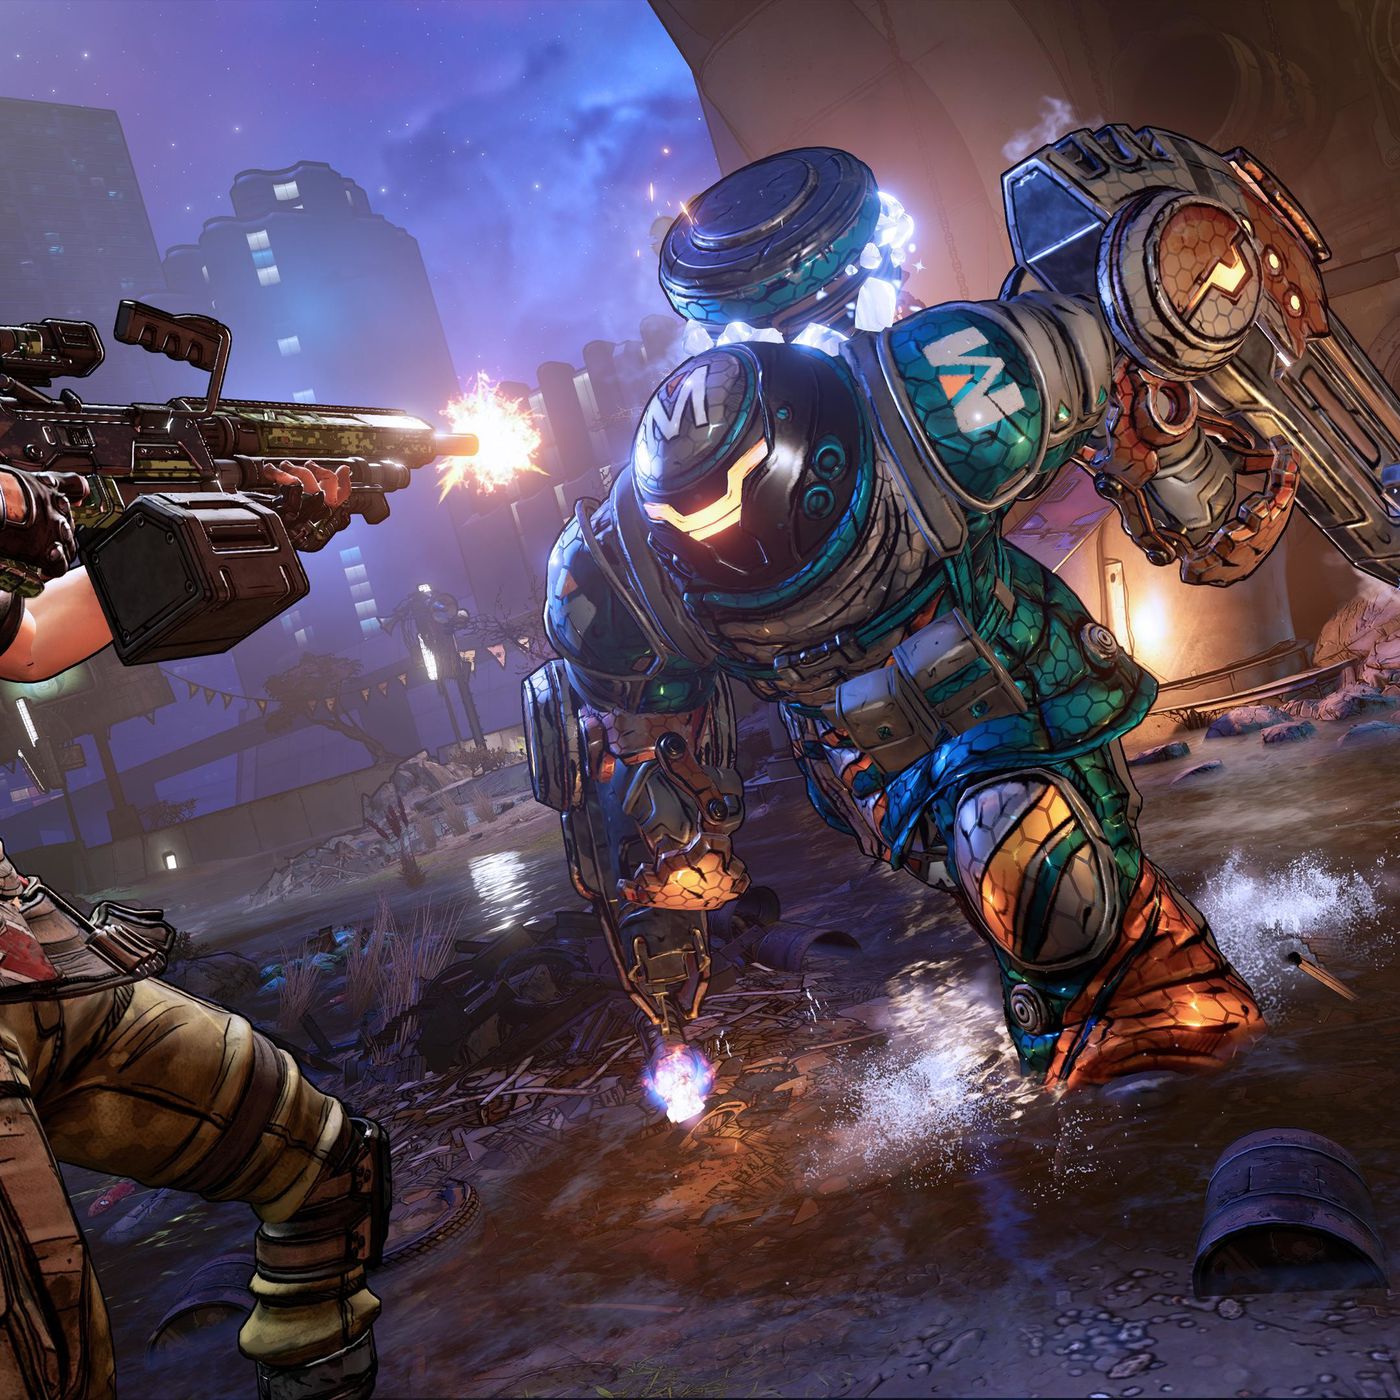 driehoek Integreren Reflectie Borderlands 3 cross-play coming, Gearbox forced to cut PS5 & PS4 support -  Polygon